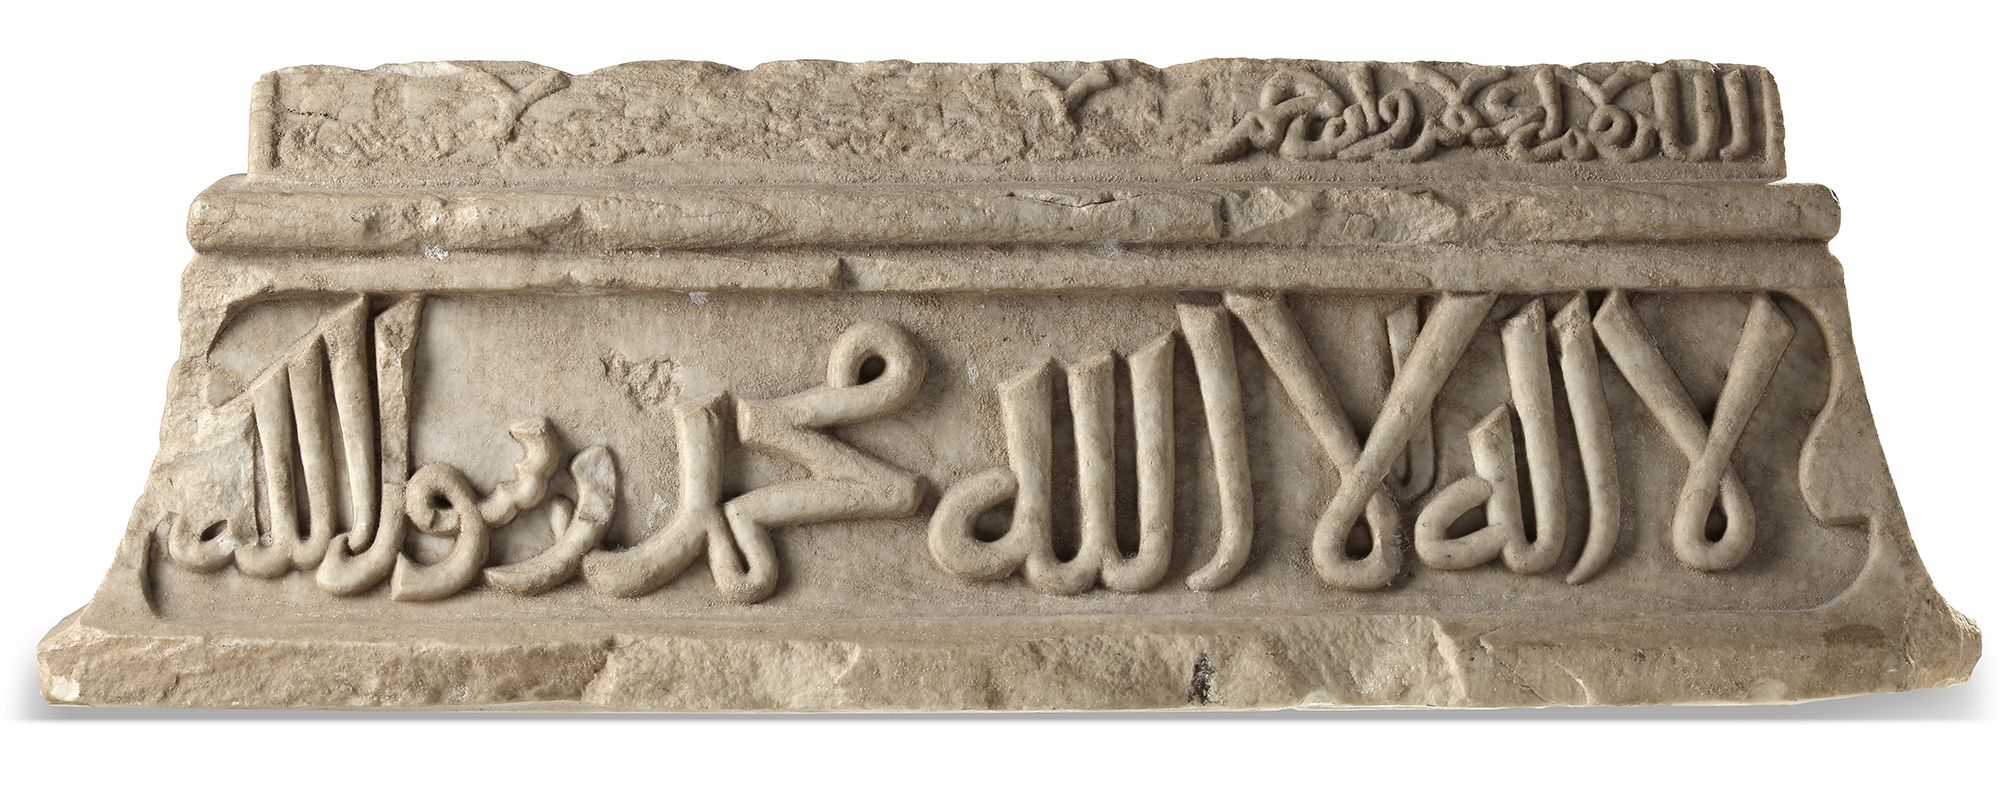 A GHAZNAVID MARBLE FUNERARY FRAGMENT, DATED 597 AH/1200 AD - Image 8 of 8